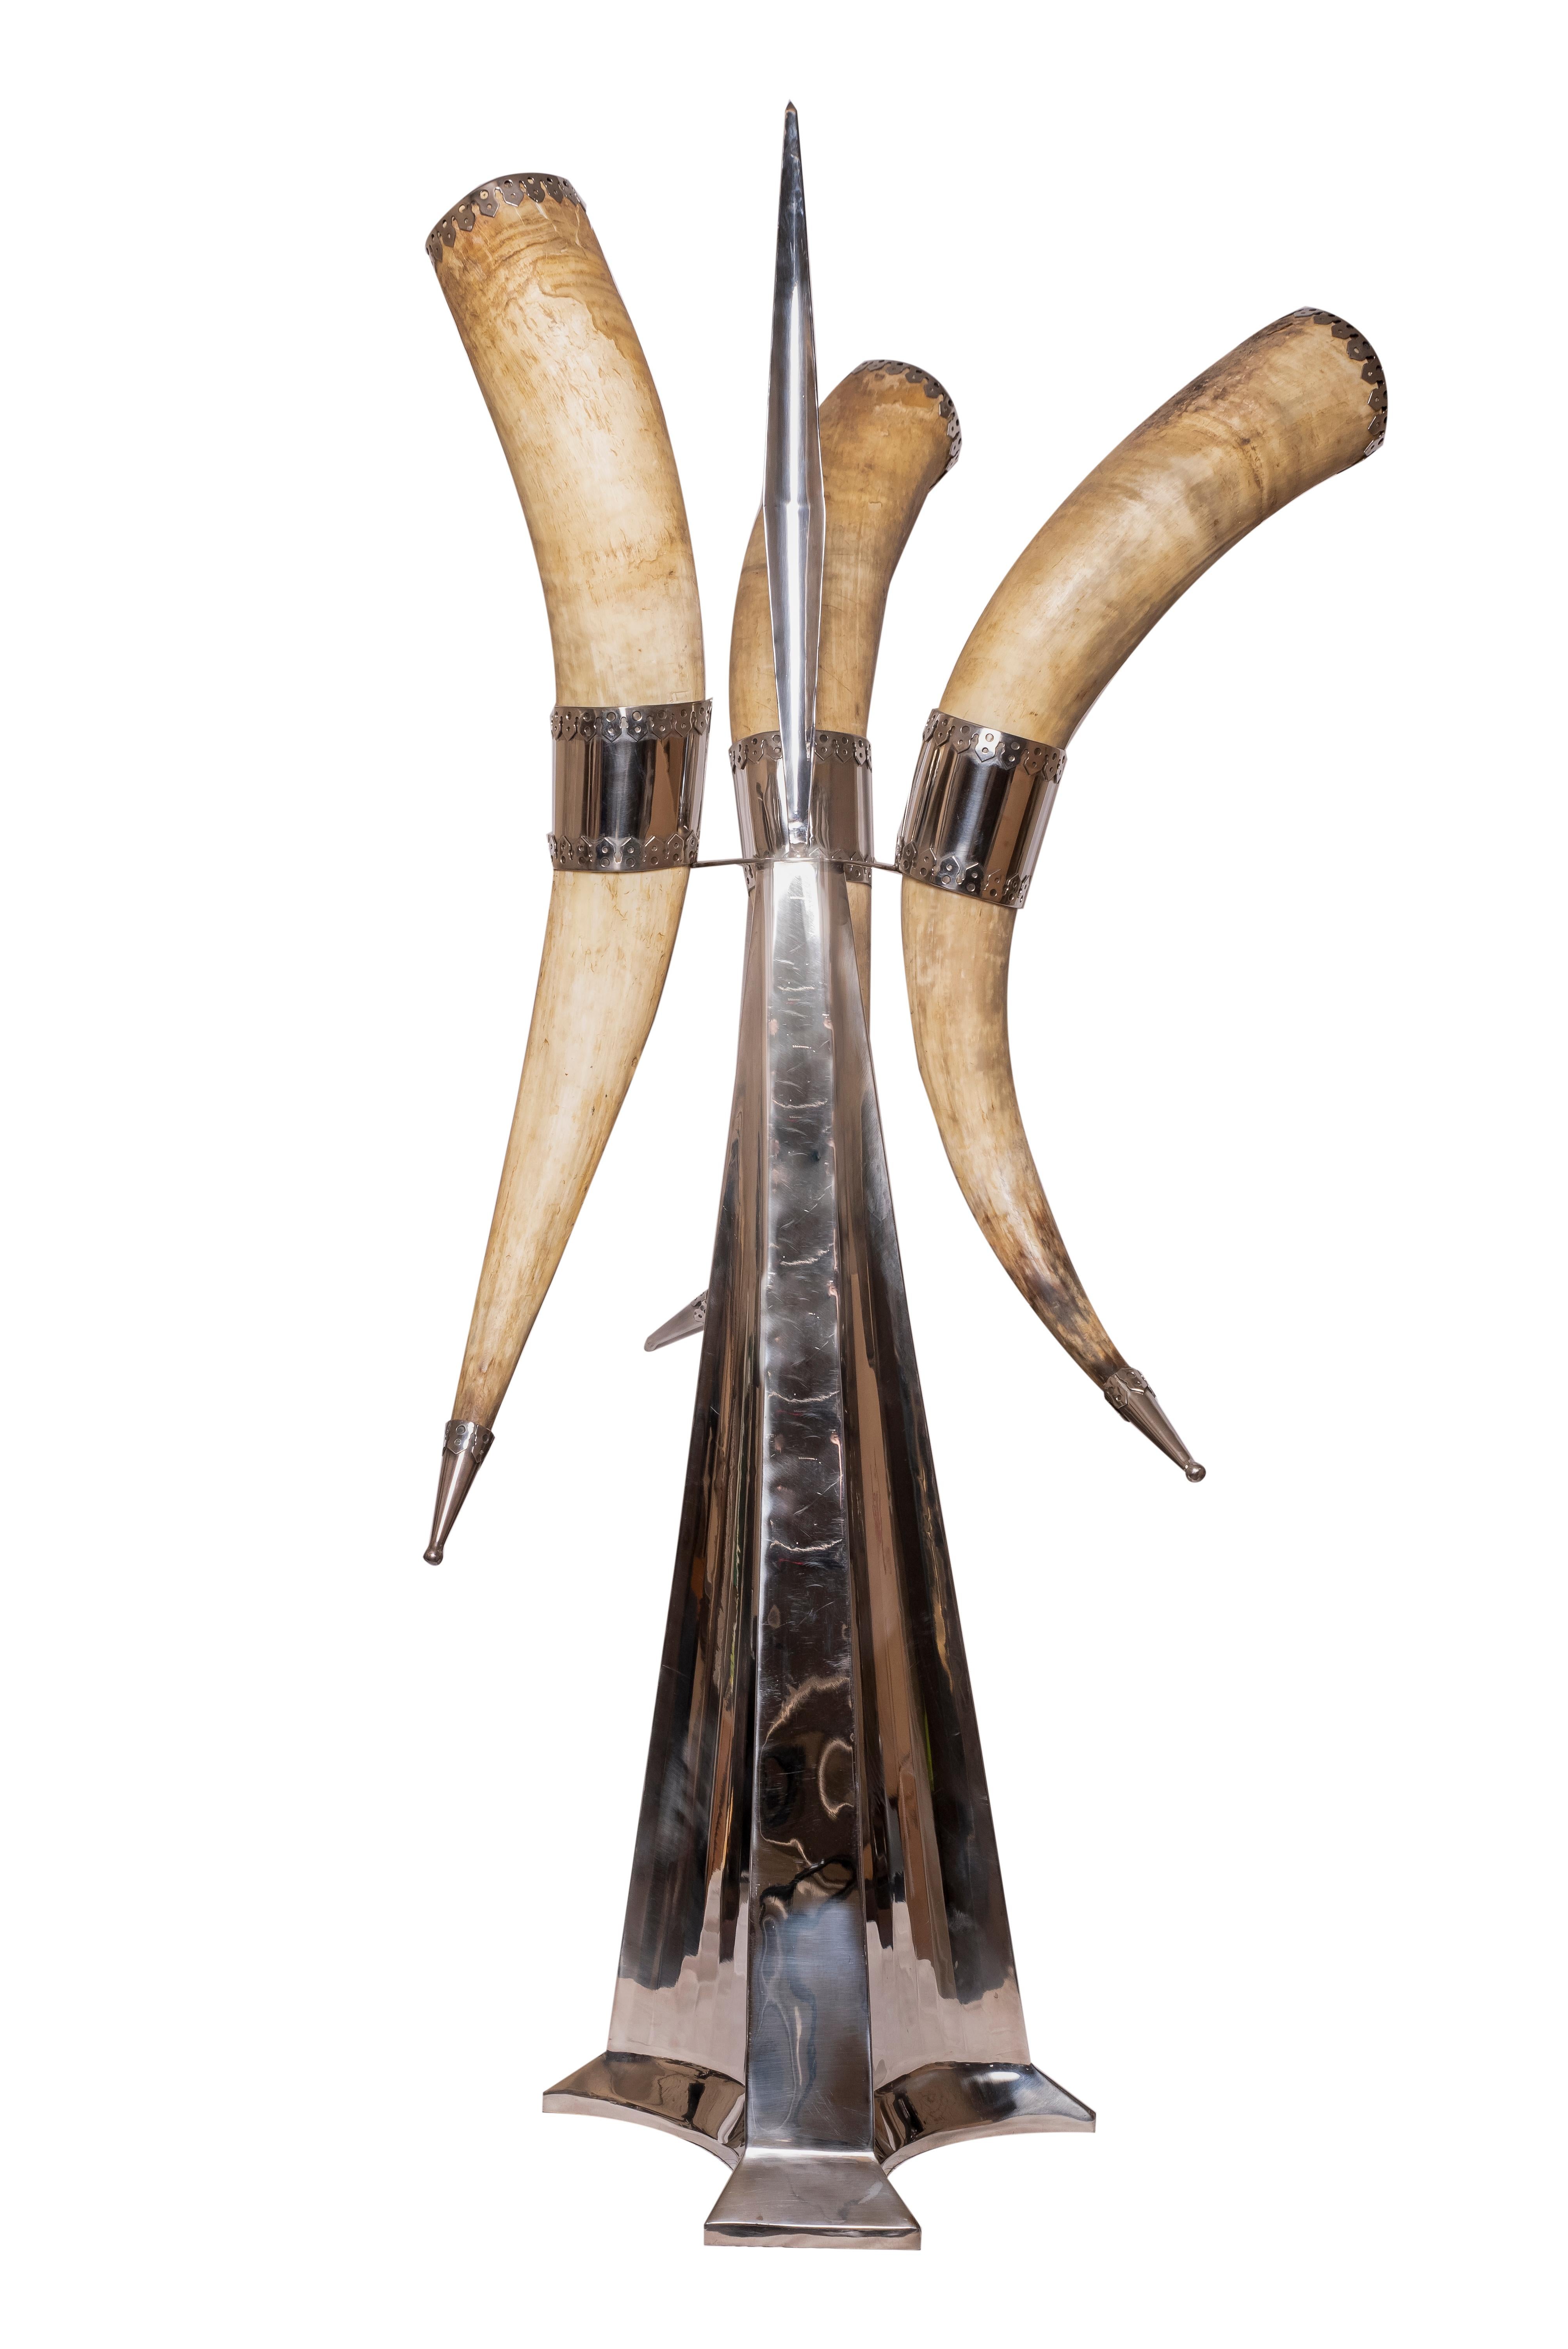 A 1970s grand sculpture by Anthony J. Redmile.
Three mounted grand horns on a stainless steel sculptural base. With plated metal ornamentation on the top and bottom of the horns.